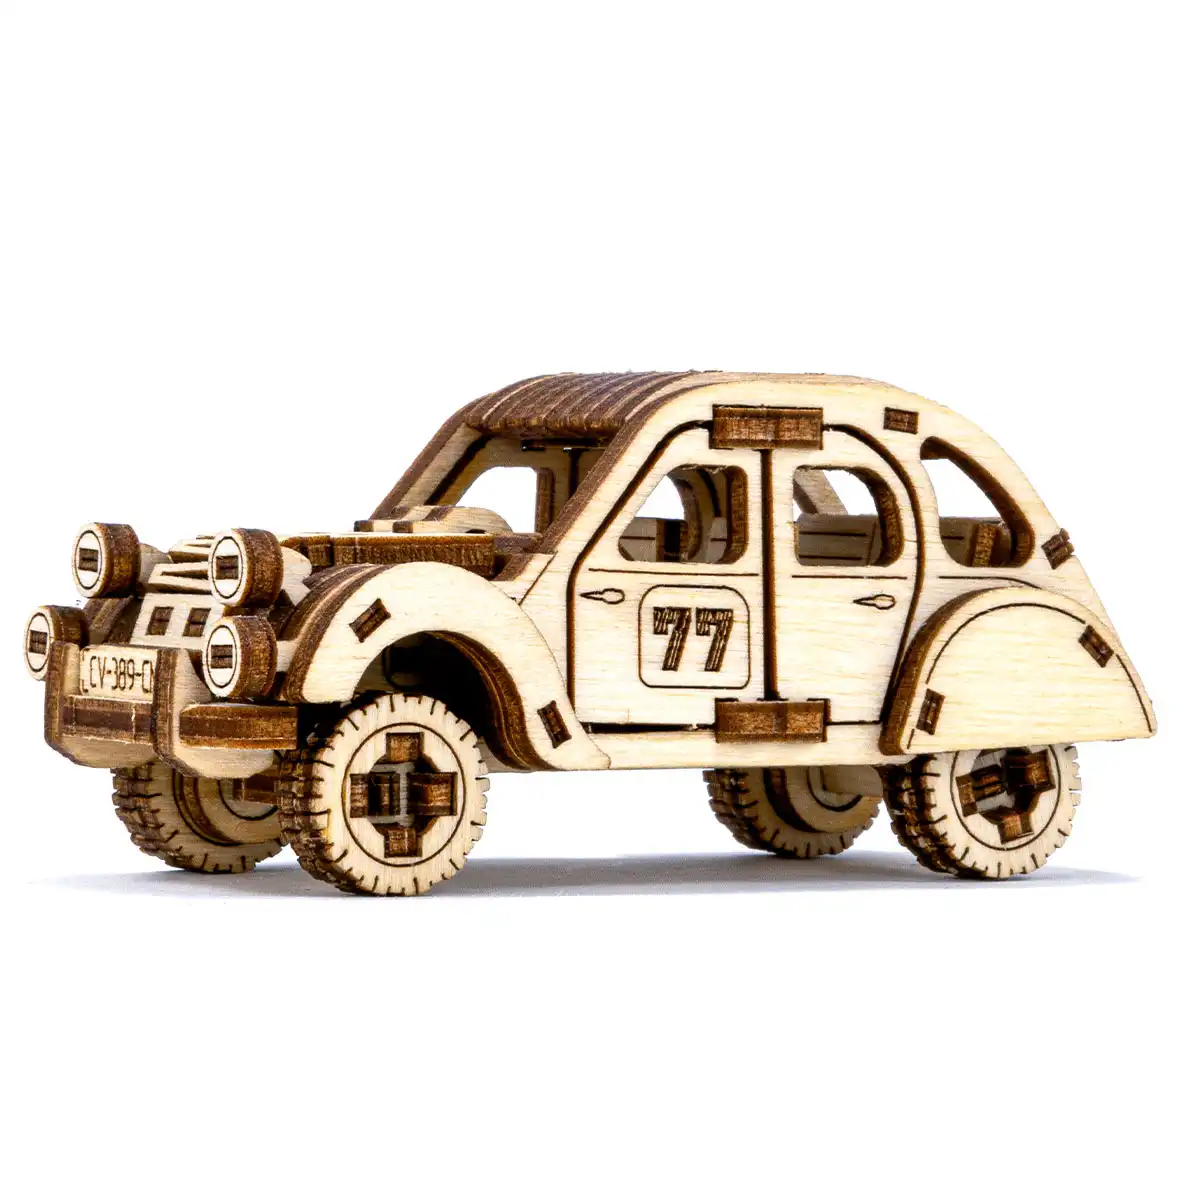 Wooden.City Bolid Car Model Kit 3D Wooden Puzzles - Wooden Models for Adults to Build and Paint It Yourself - Wooden 3D Puzzles for Adults - Model Car